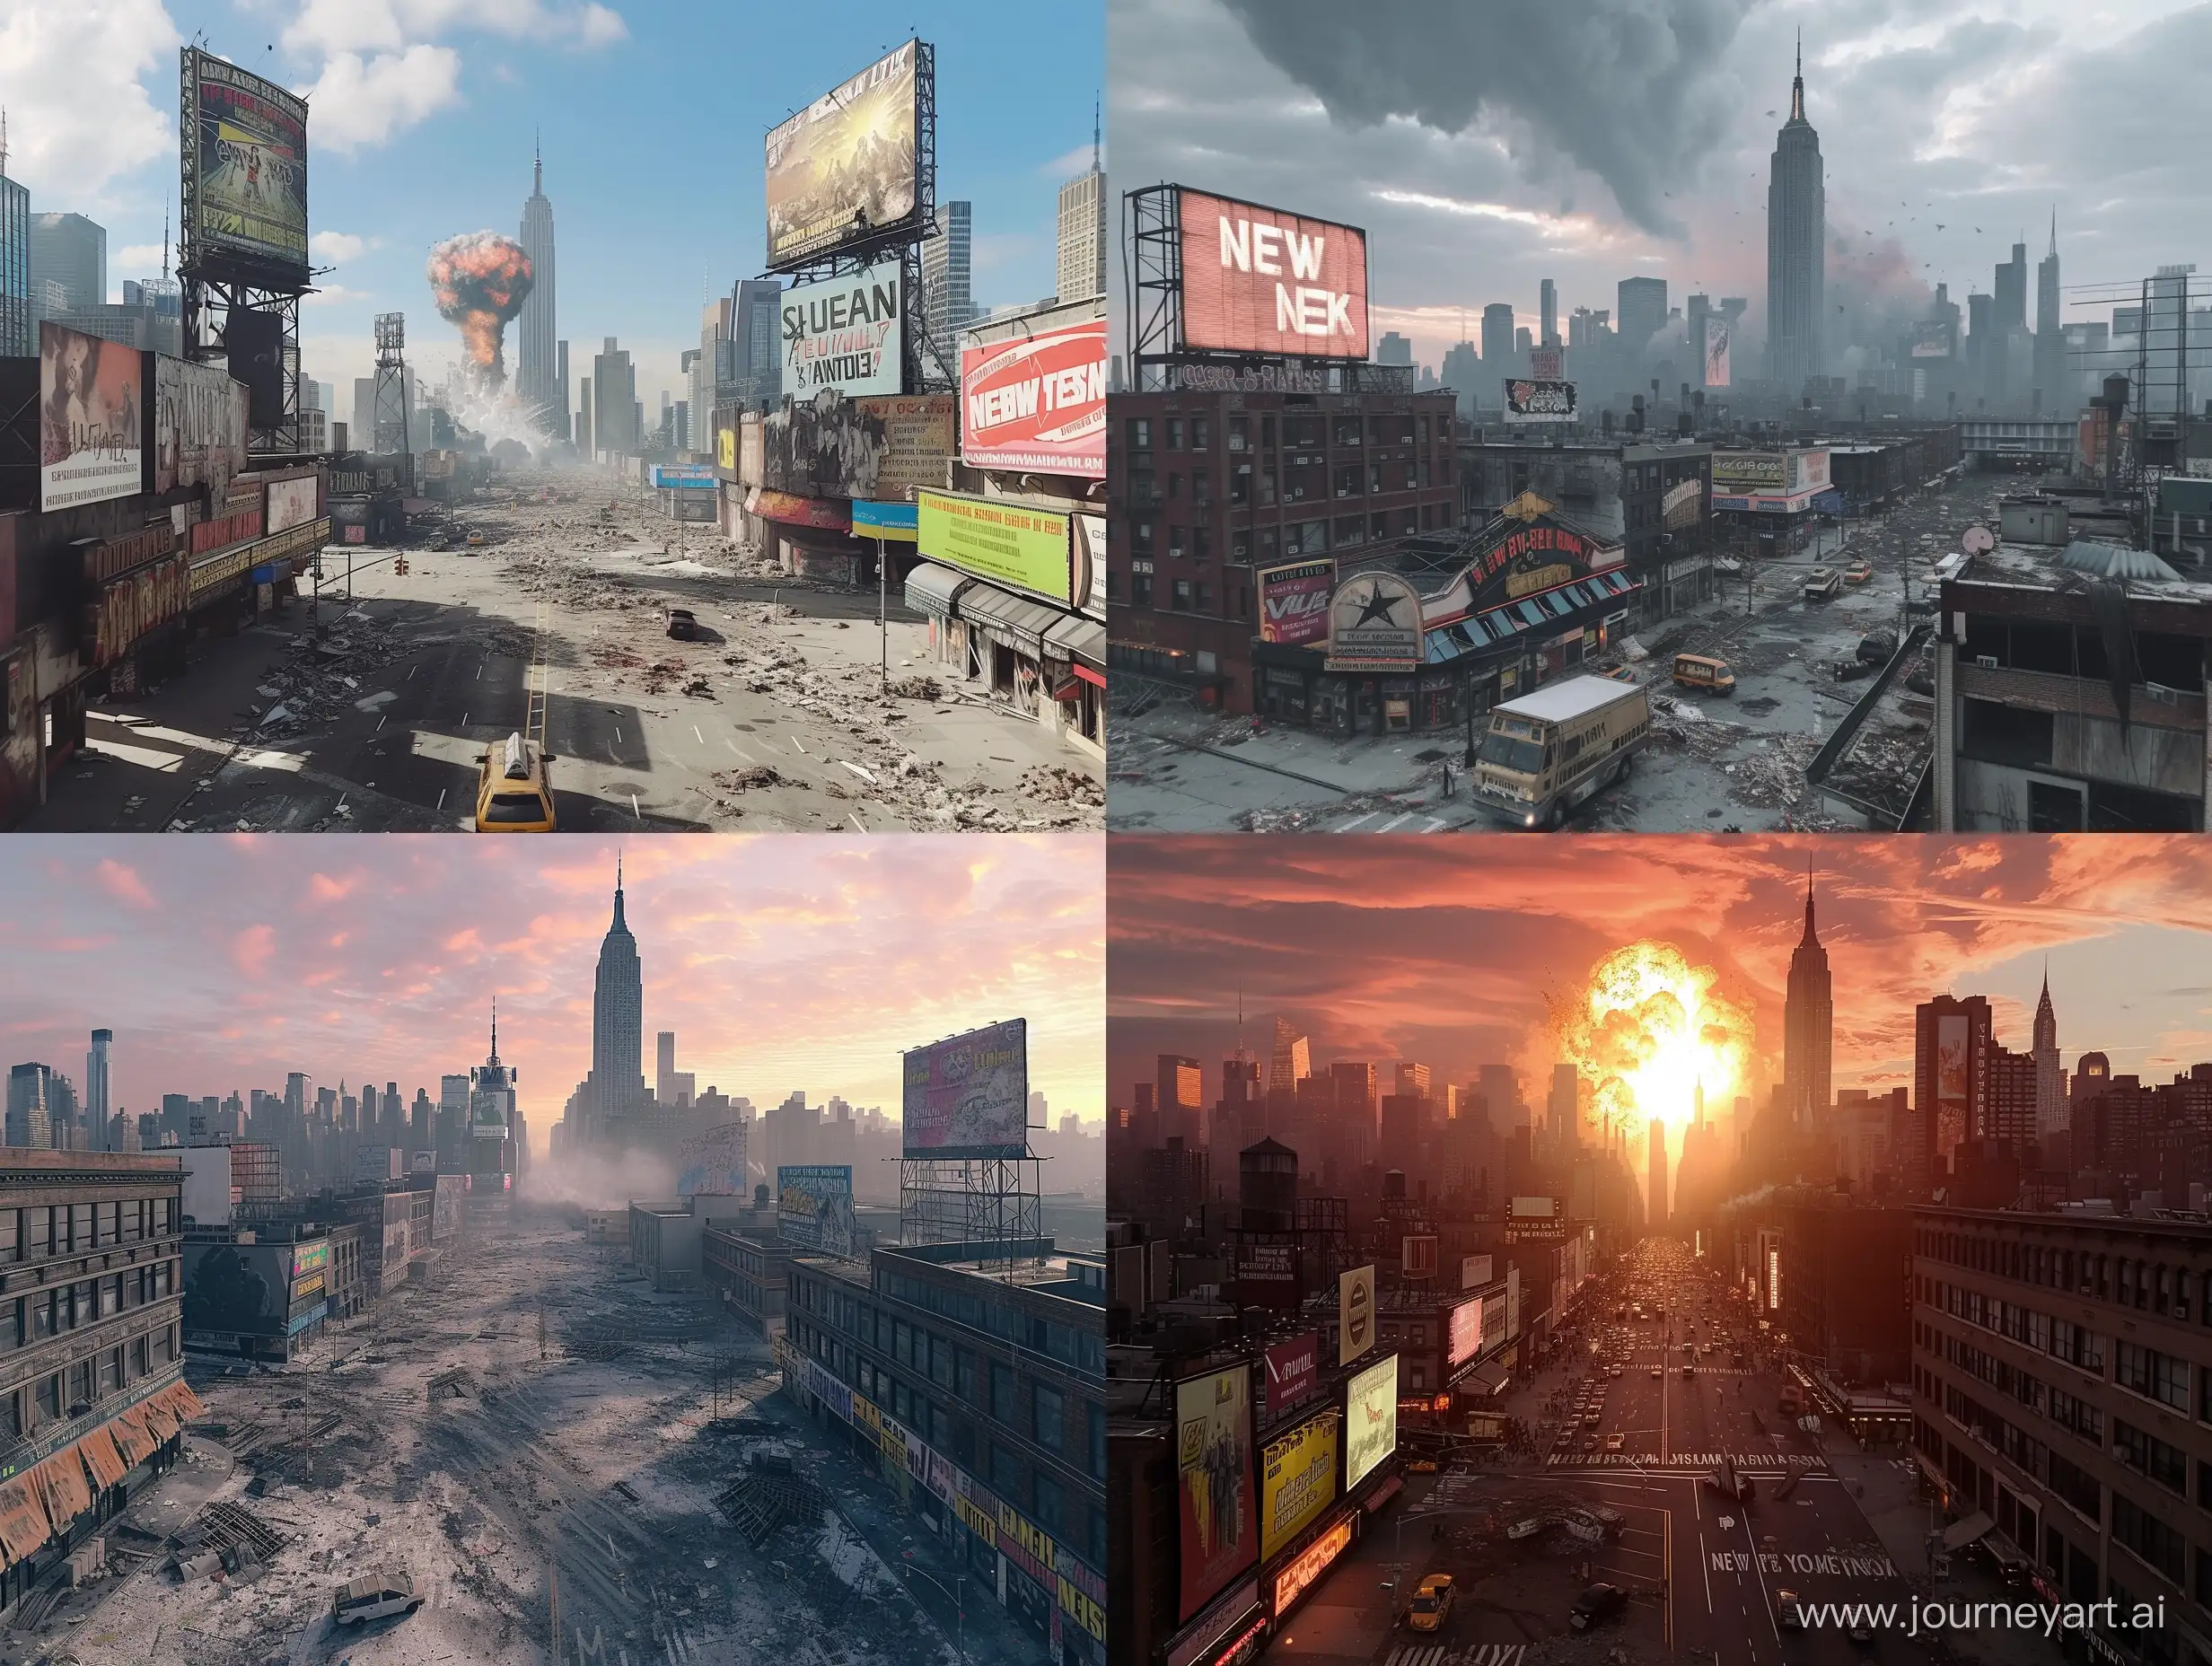 phone photo of new york aftermath of a nuke explosion, photography, natural lighting, scenes, skyline, drone view, billboards an stores, screengrab, detailed,